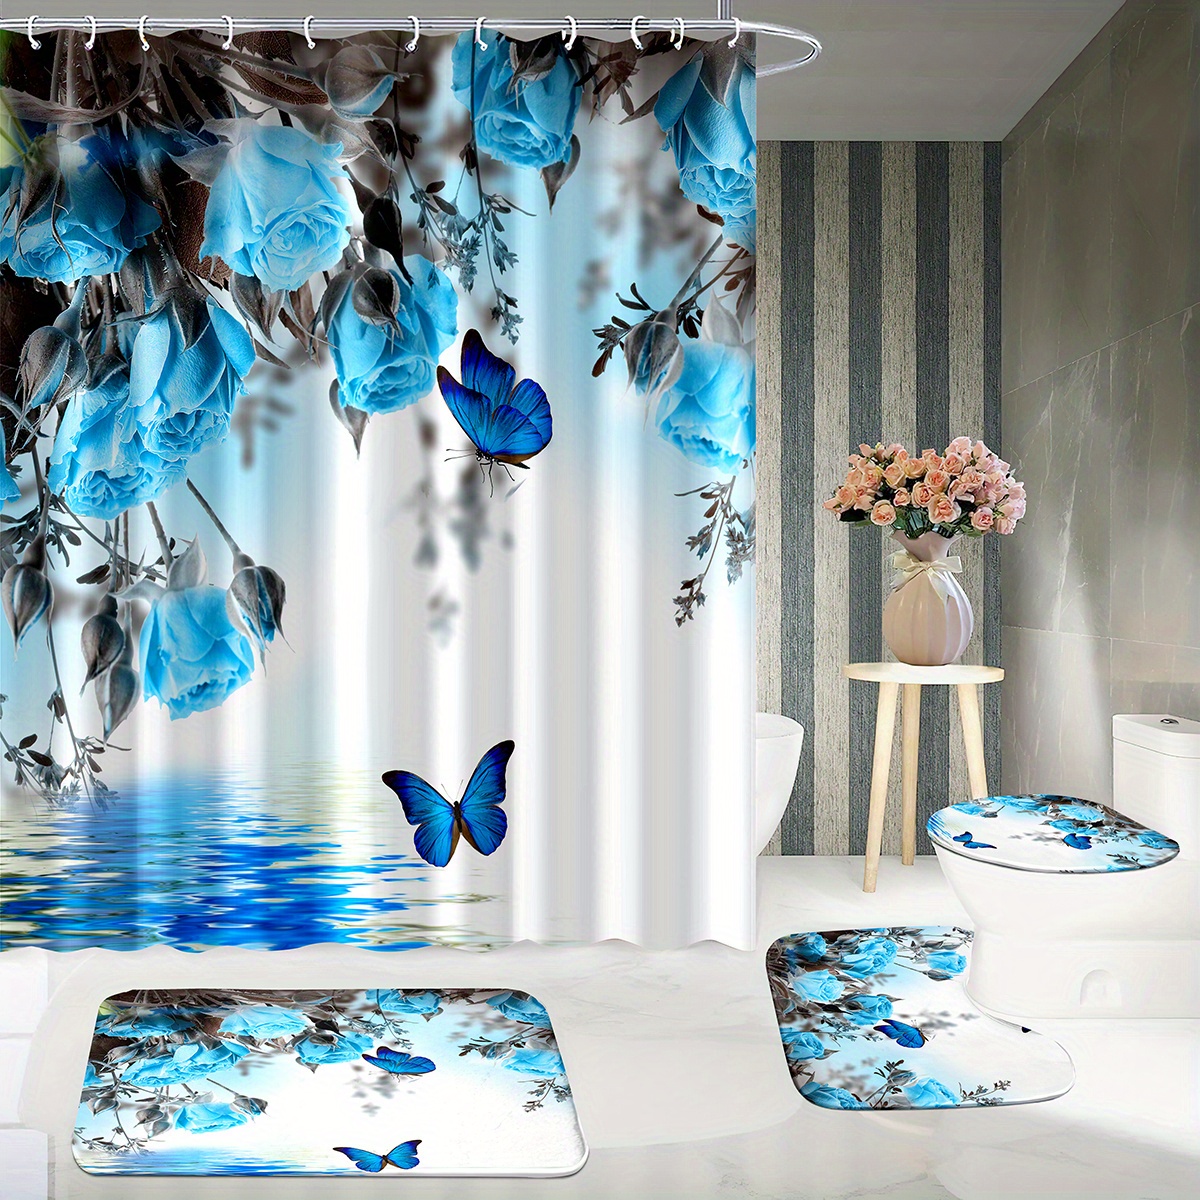 Floral Teal Shower Curtain Sets with 12 Hooks Shower Curtain